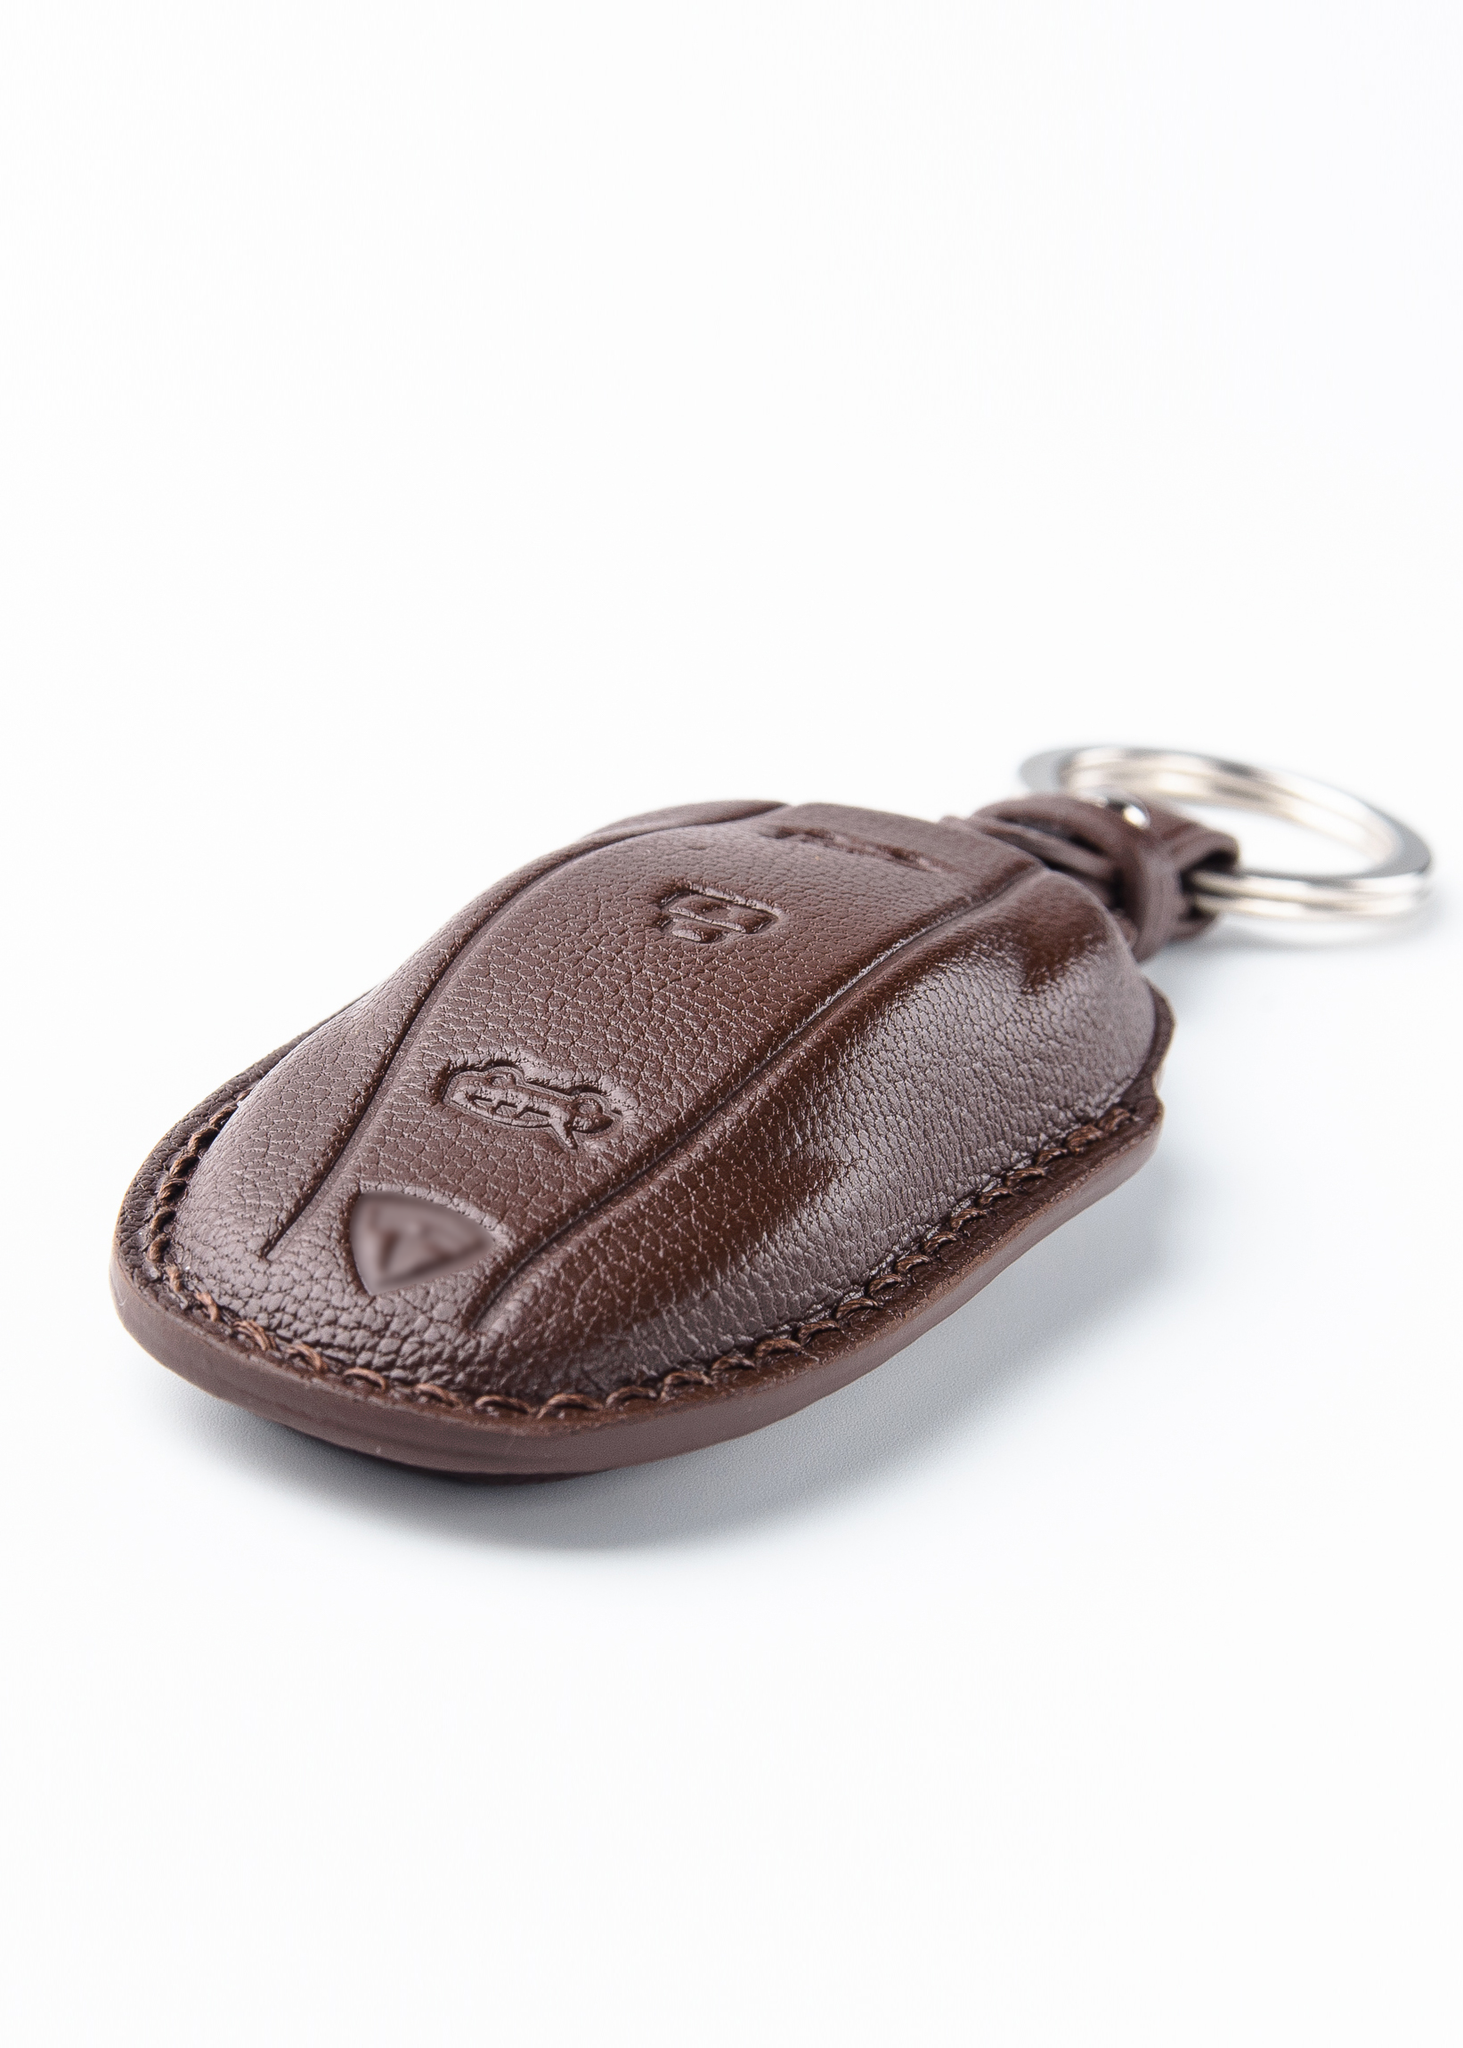 Timotheus for Tesla Model S key fob cover case, Compatible with Tesla Model S key case, Handmade Genuine Leather for Tesla Model S keychains | TS11